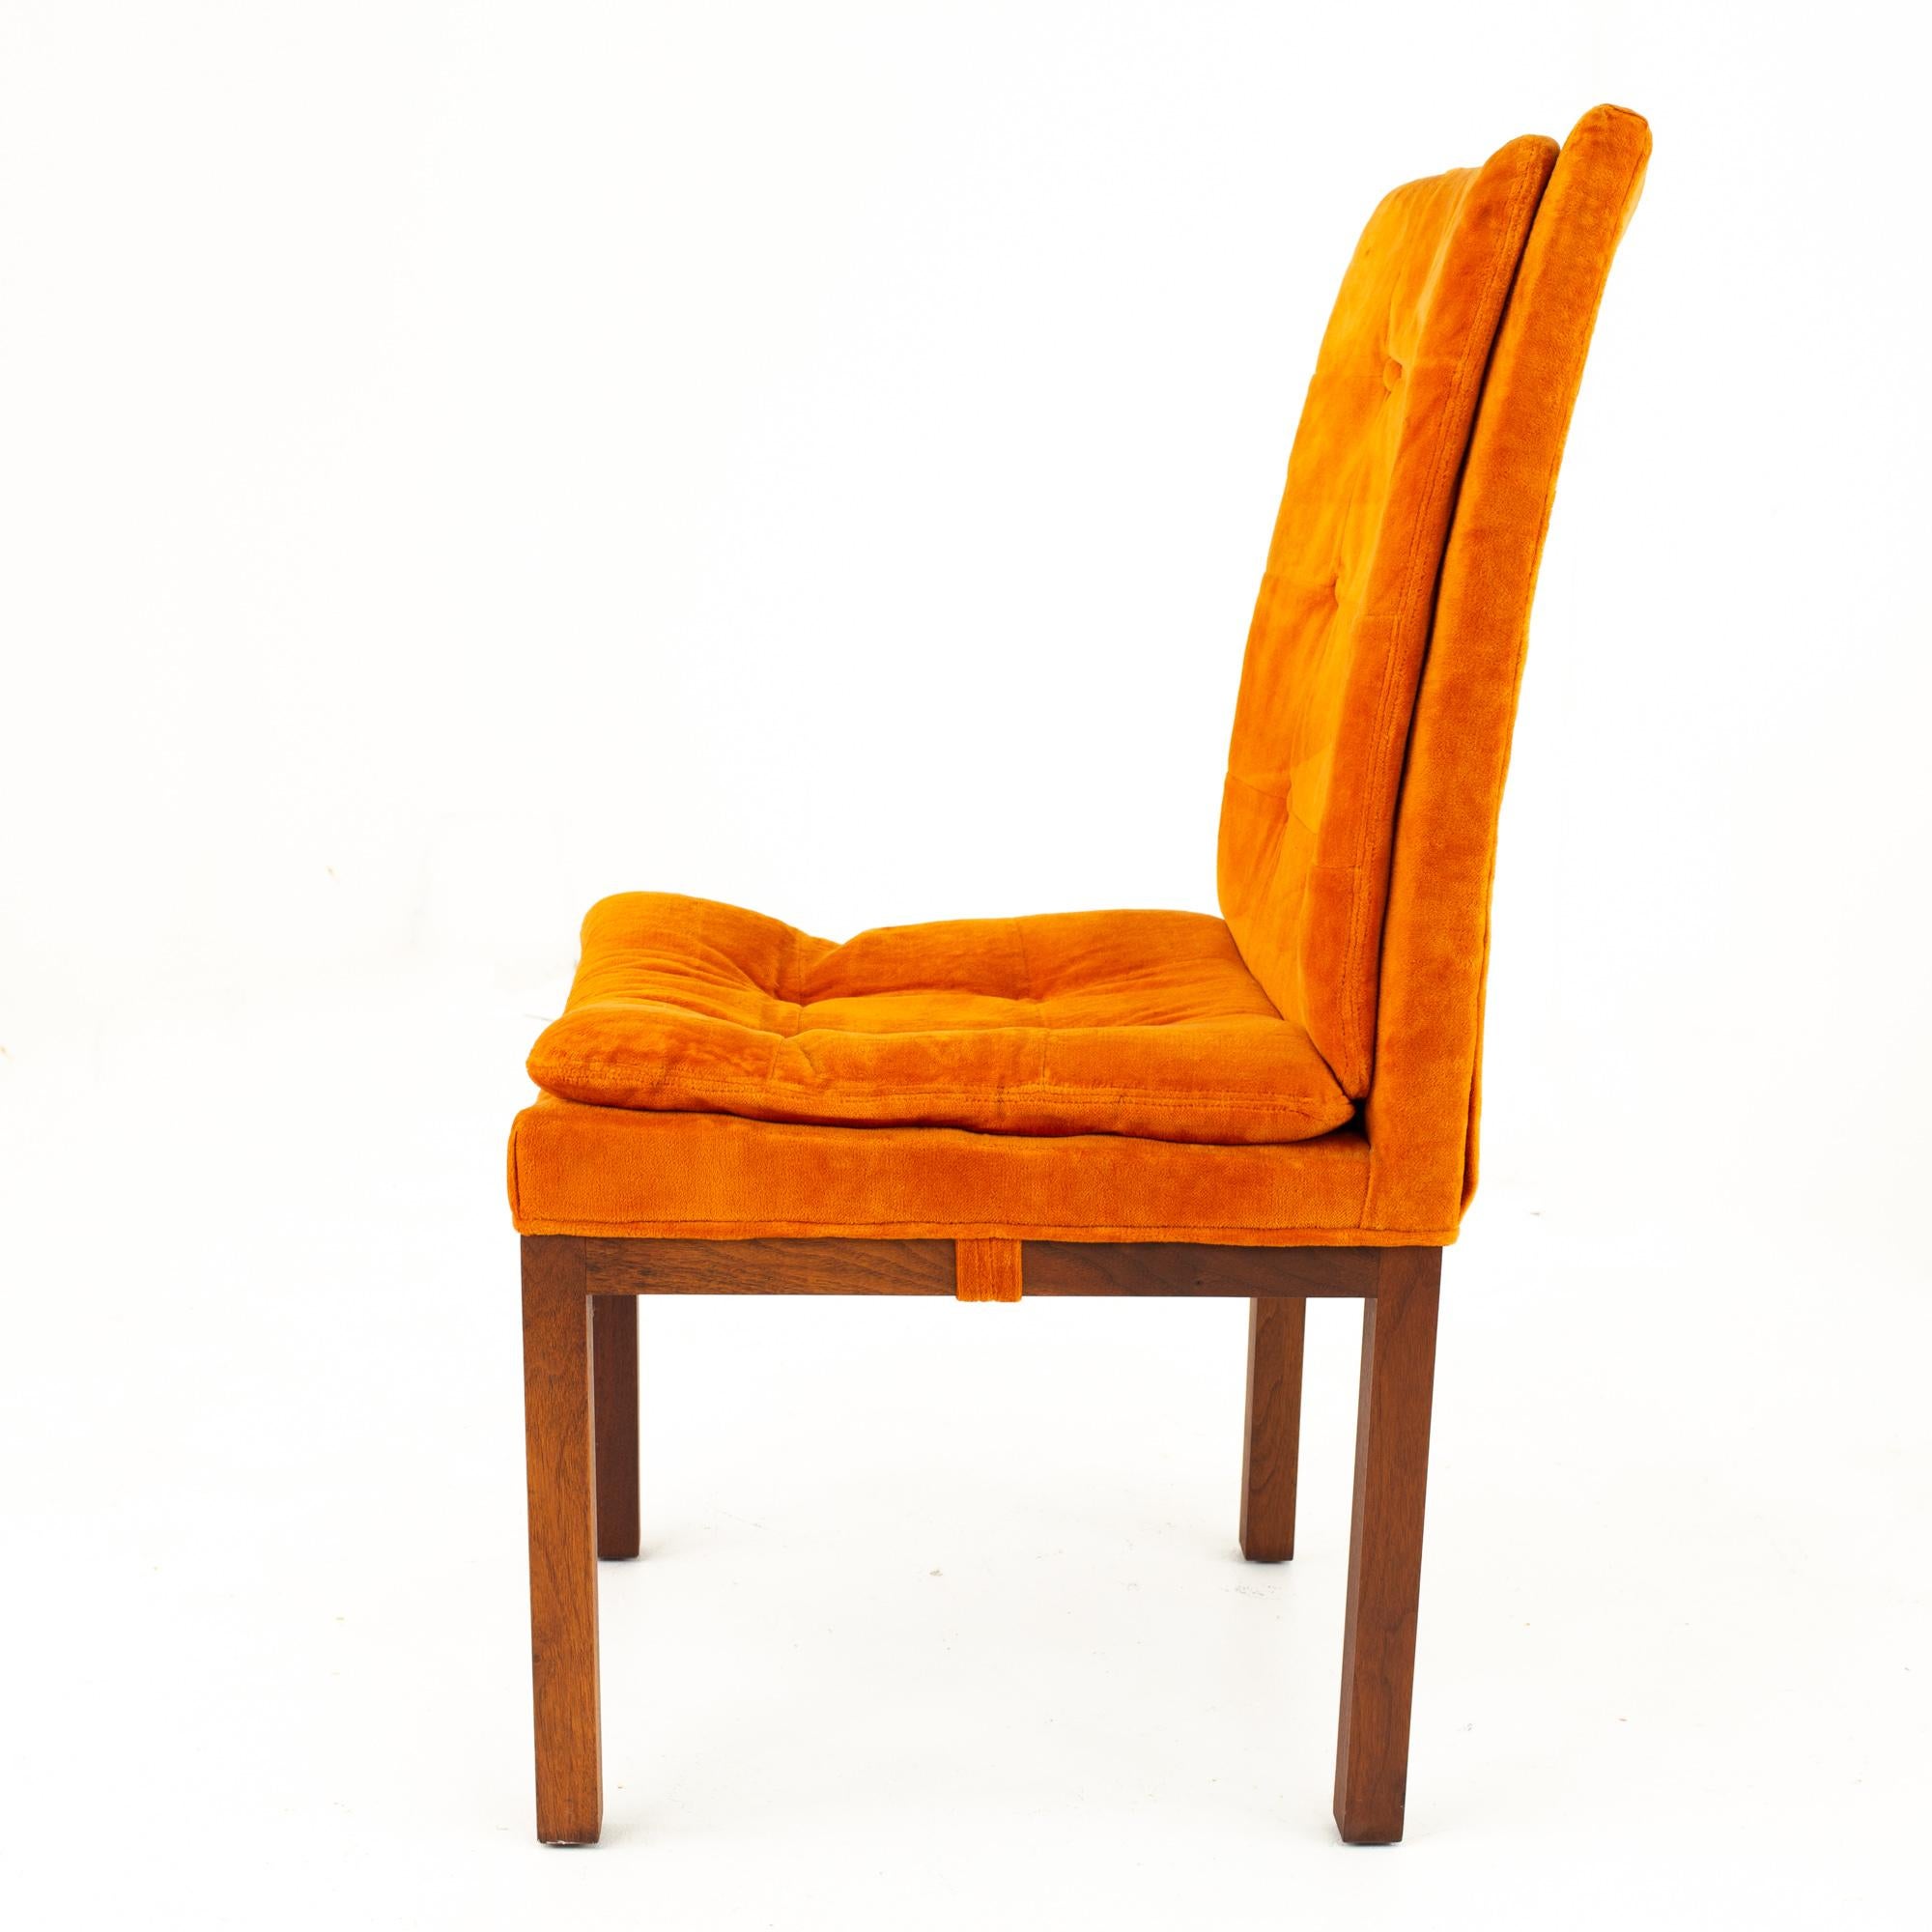 Milo Baughman Style Dillingham Orange and Walnut Upholstered Dining Chairs - Set 8